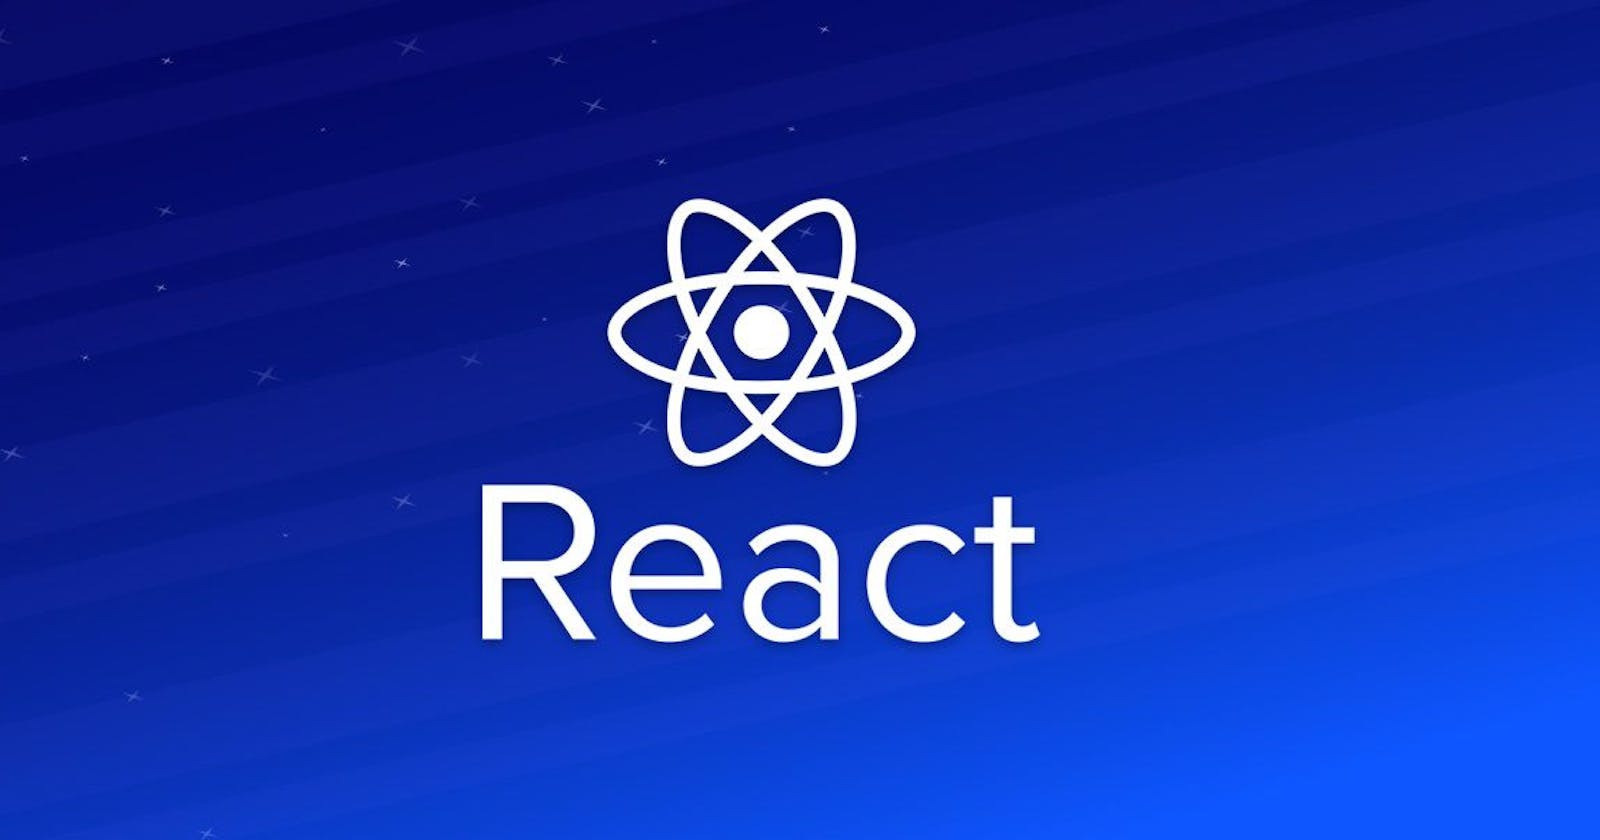 How Does React Work?